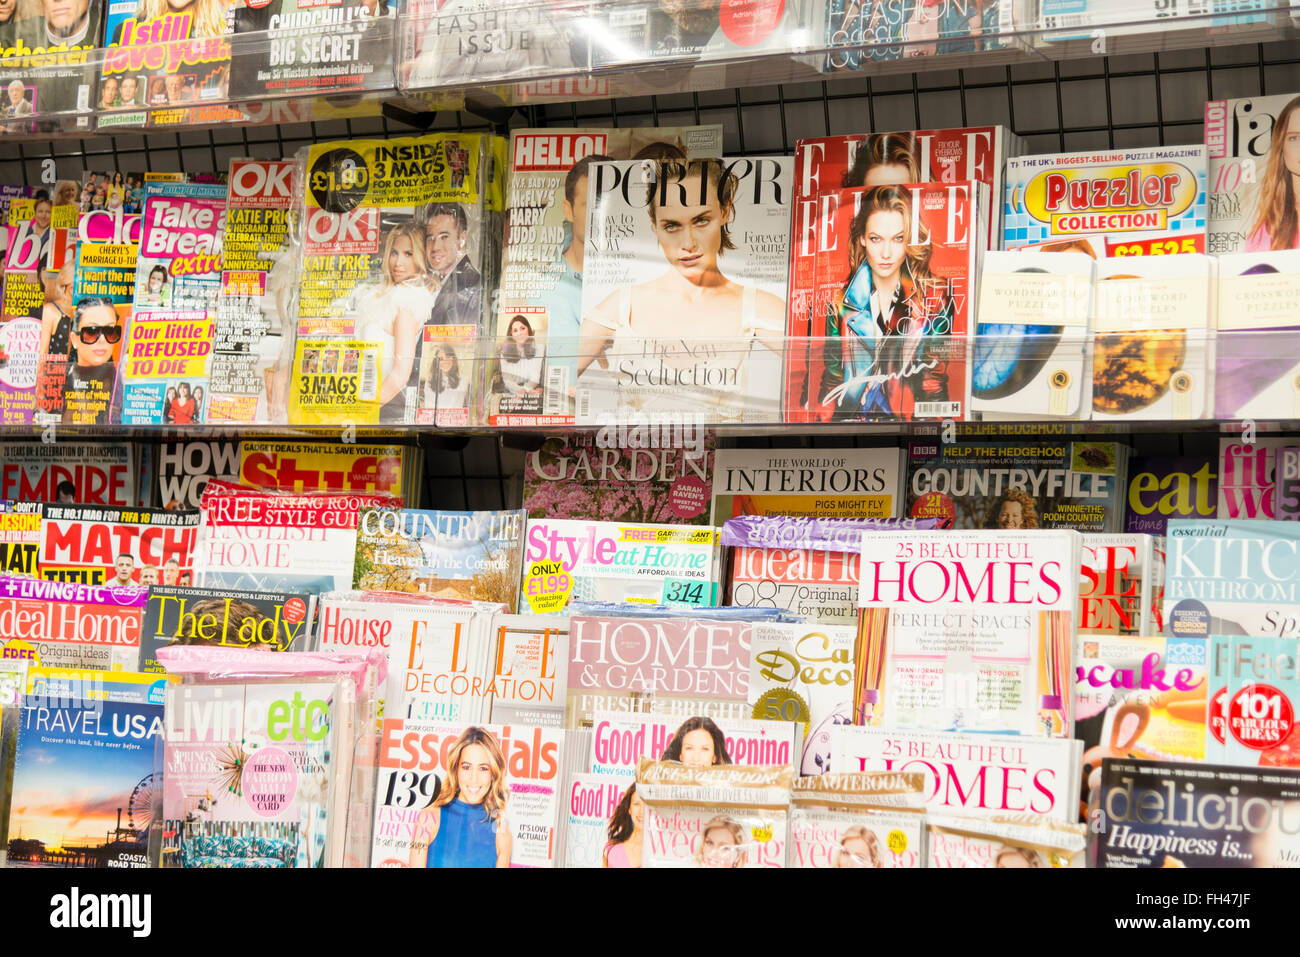 Magazines for sale in a store, UK. Stock Photo